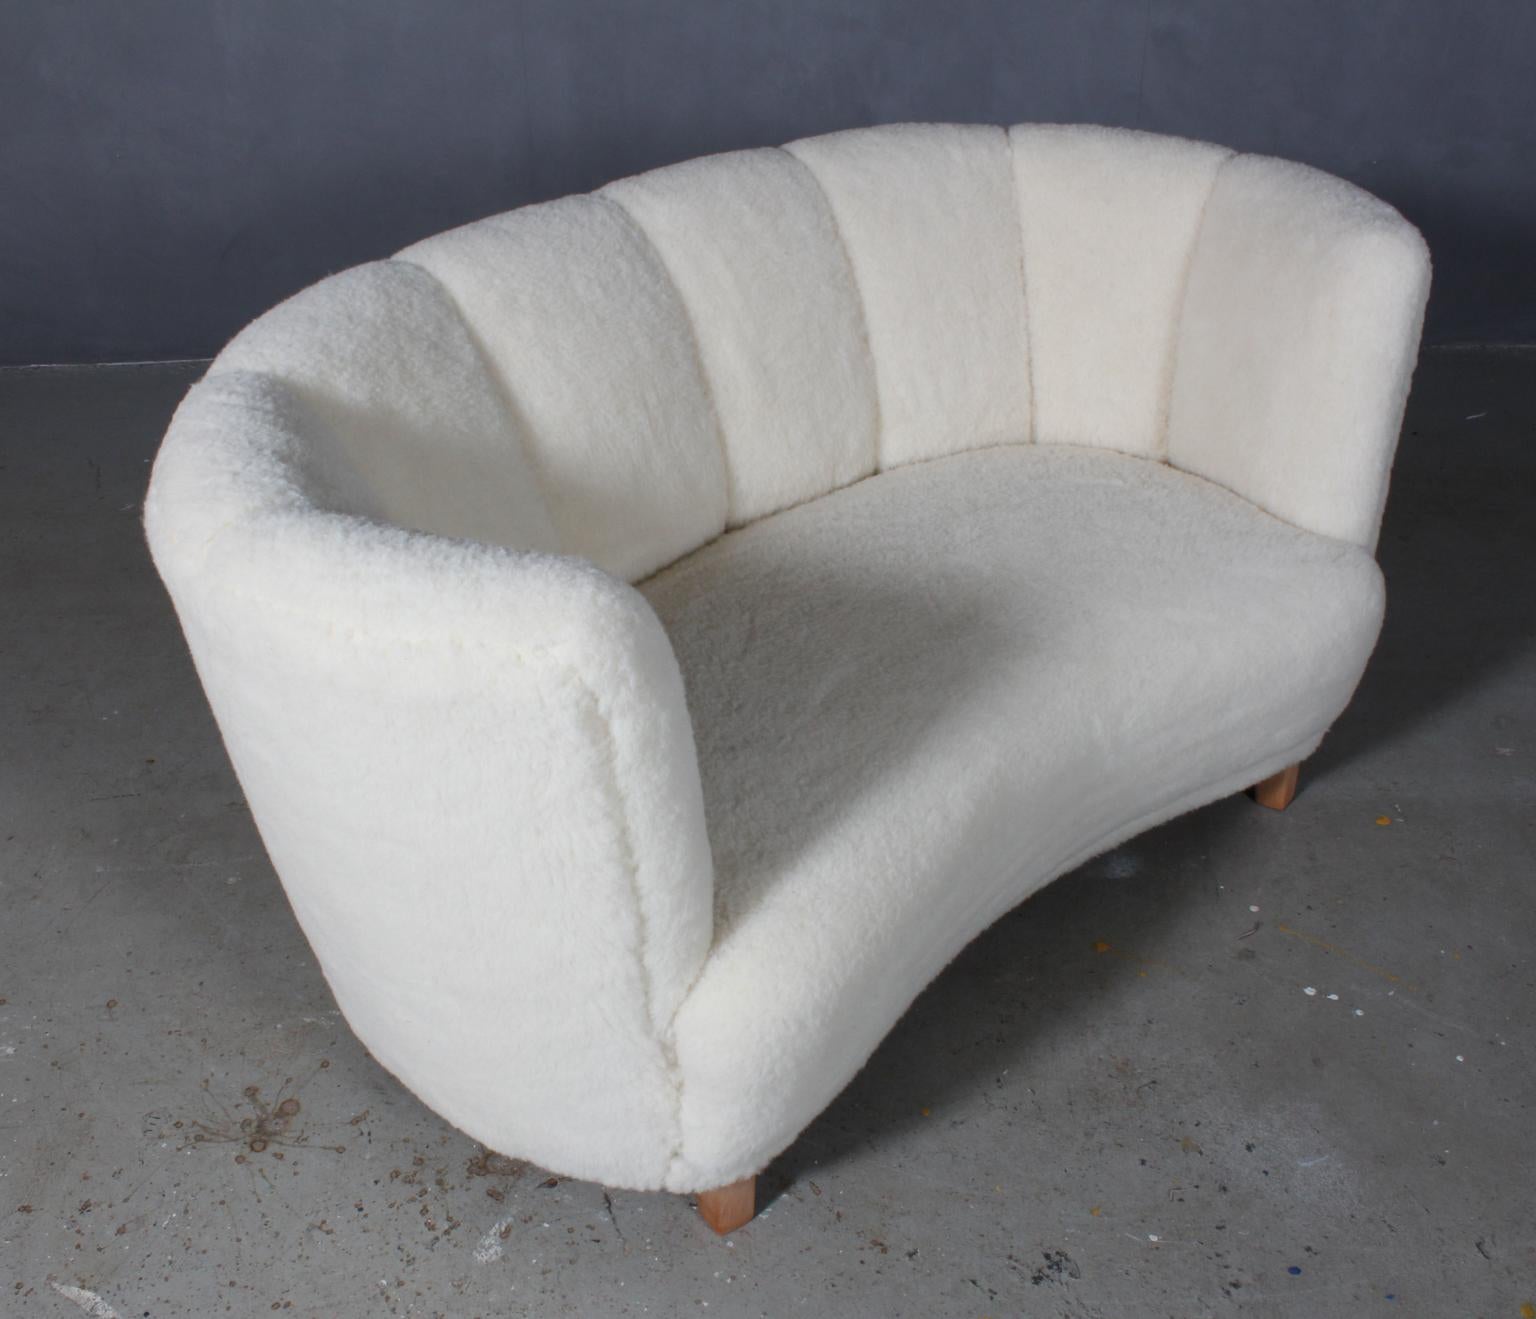 Danish cabinetmaker two-seat sofa new upholstered with lambwool.

Legs of beech

Made in the 1940s.